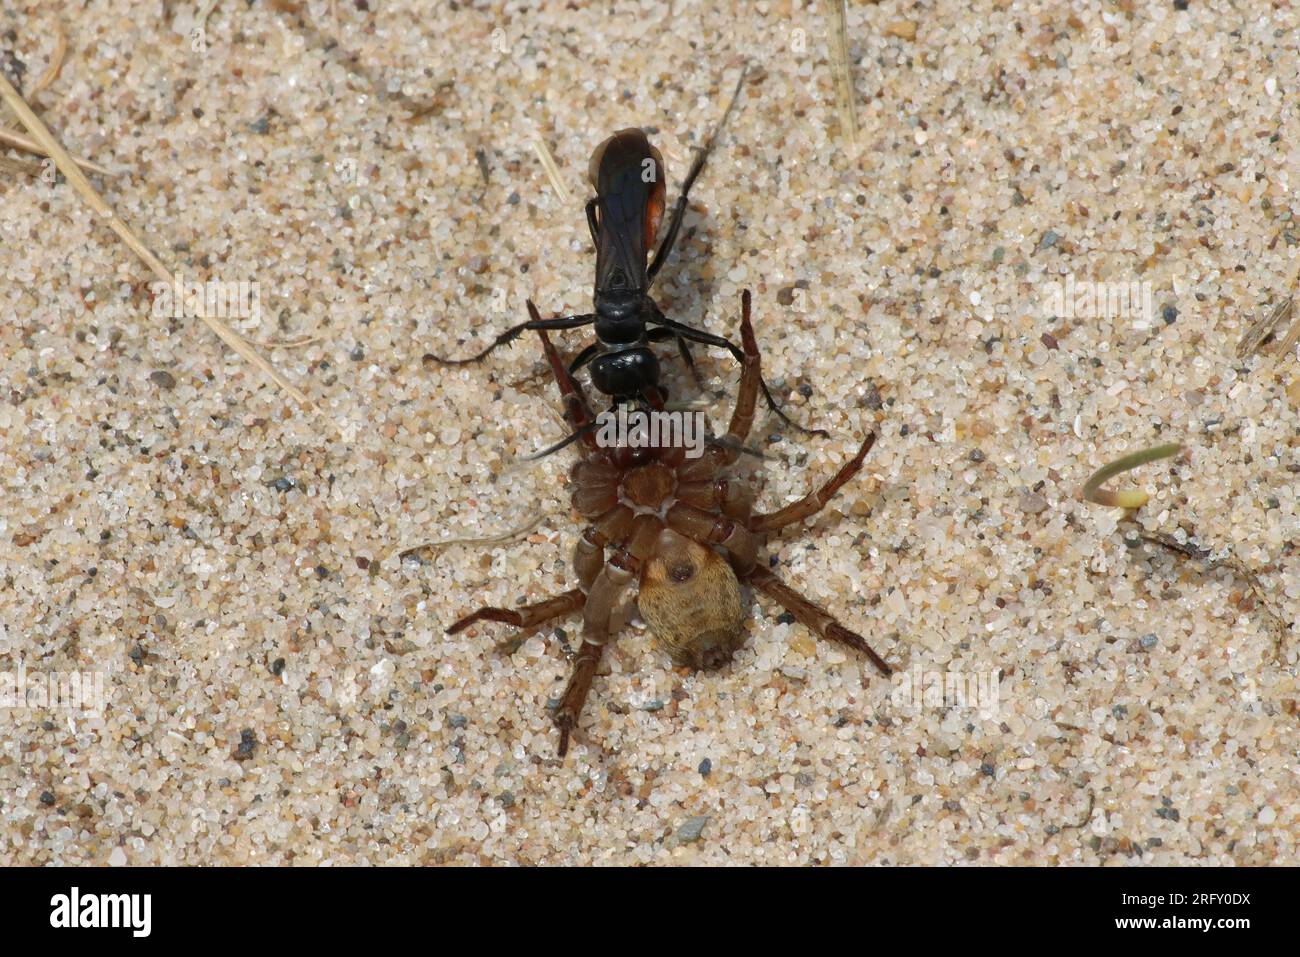 Spider Hunting Wasp Priocnemis sp. with prey Stock Photo